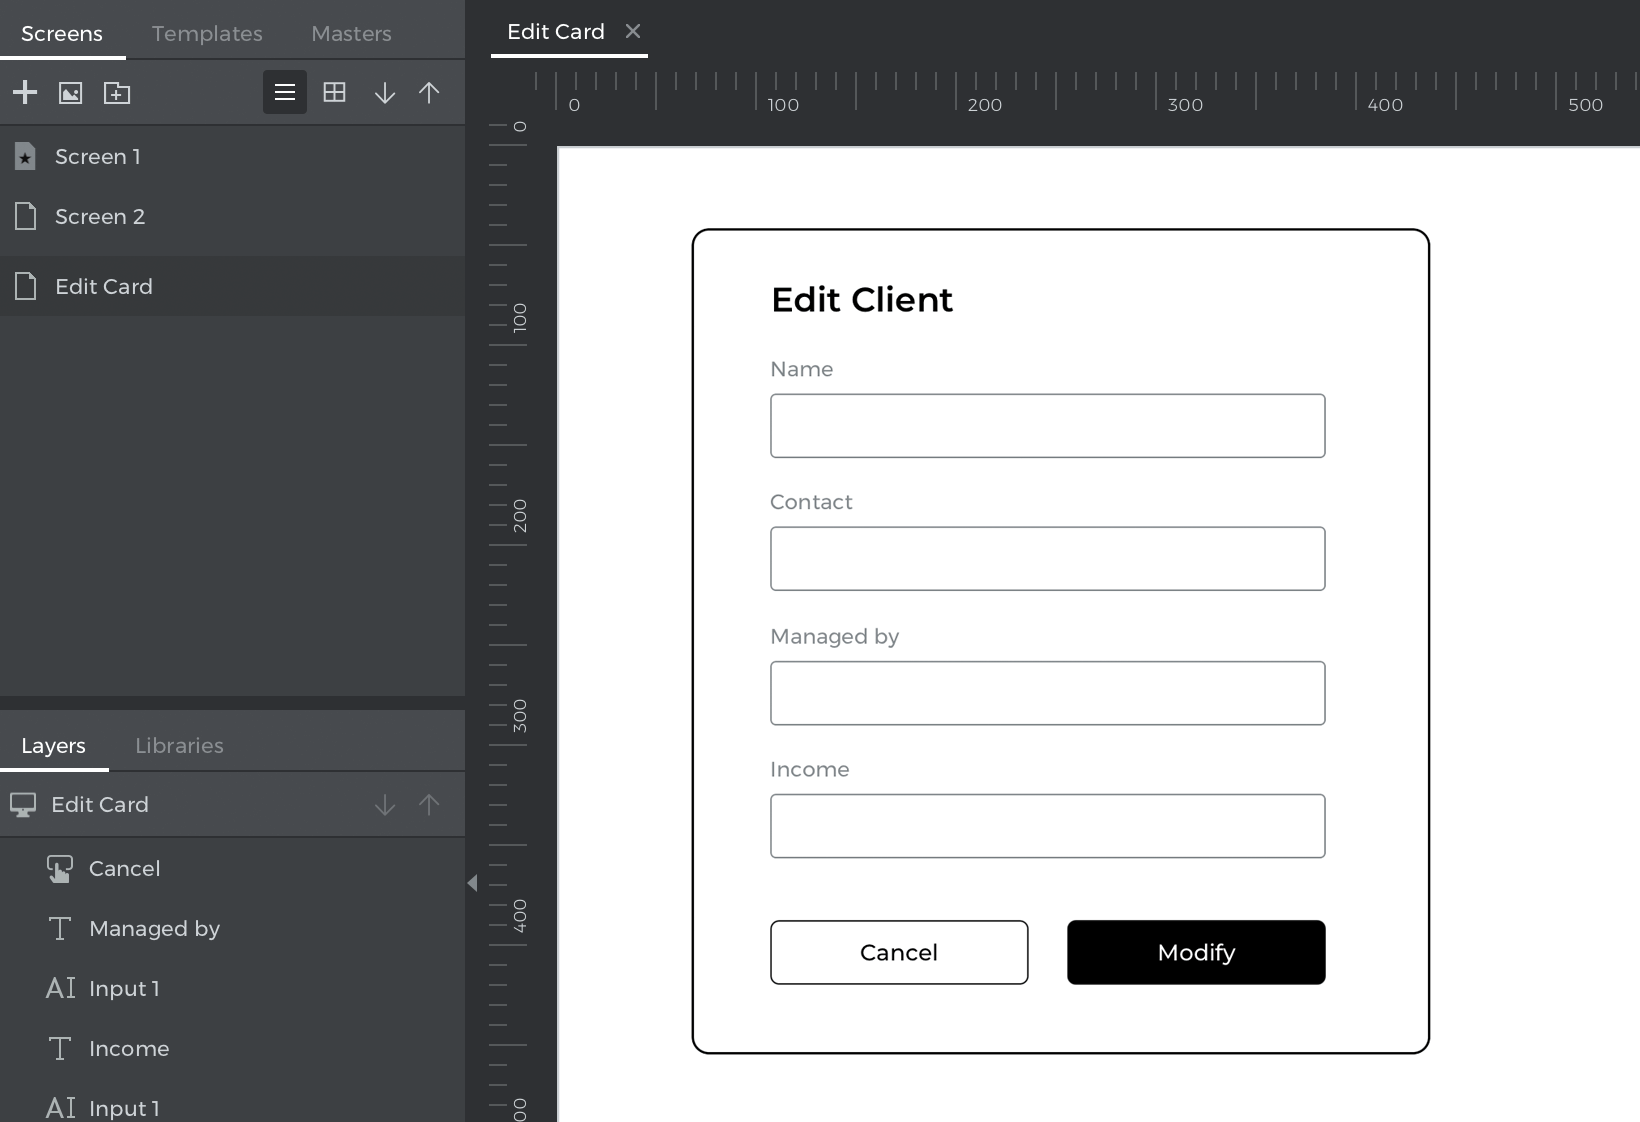 The modify form with four input text fields and two buttons